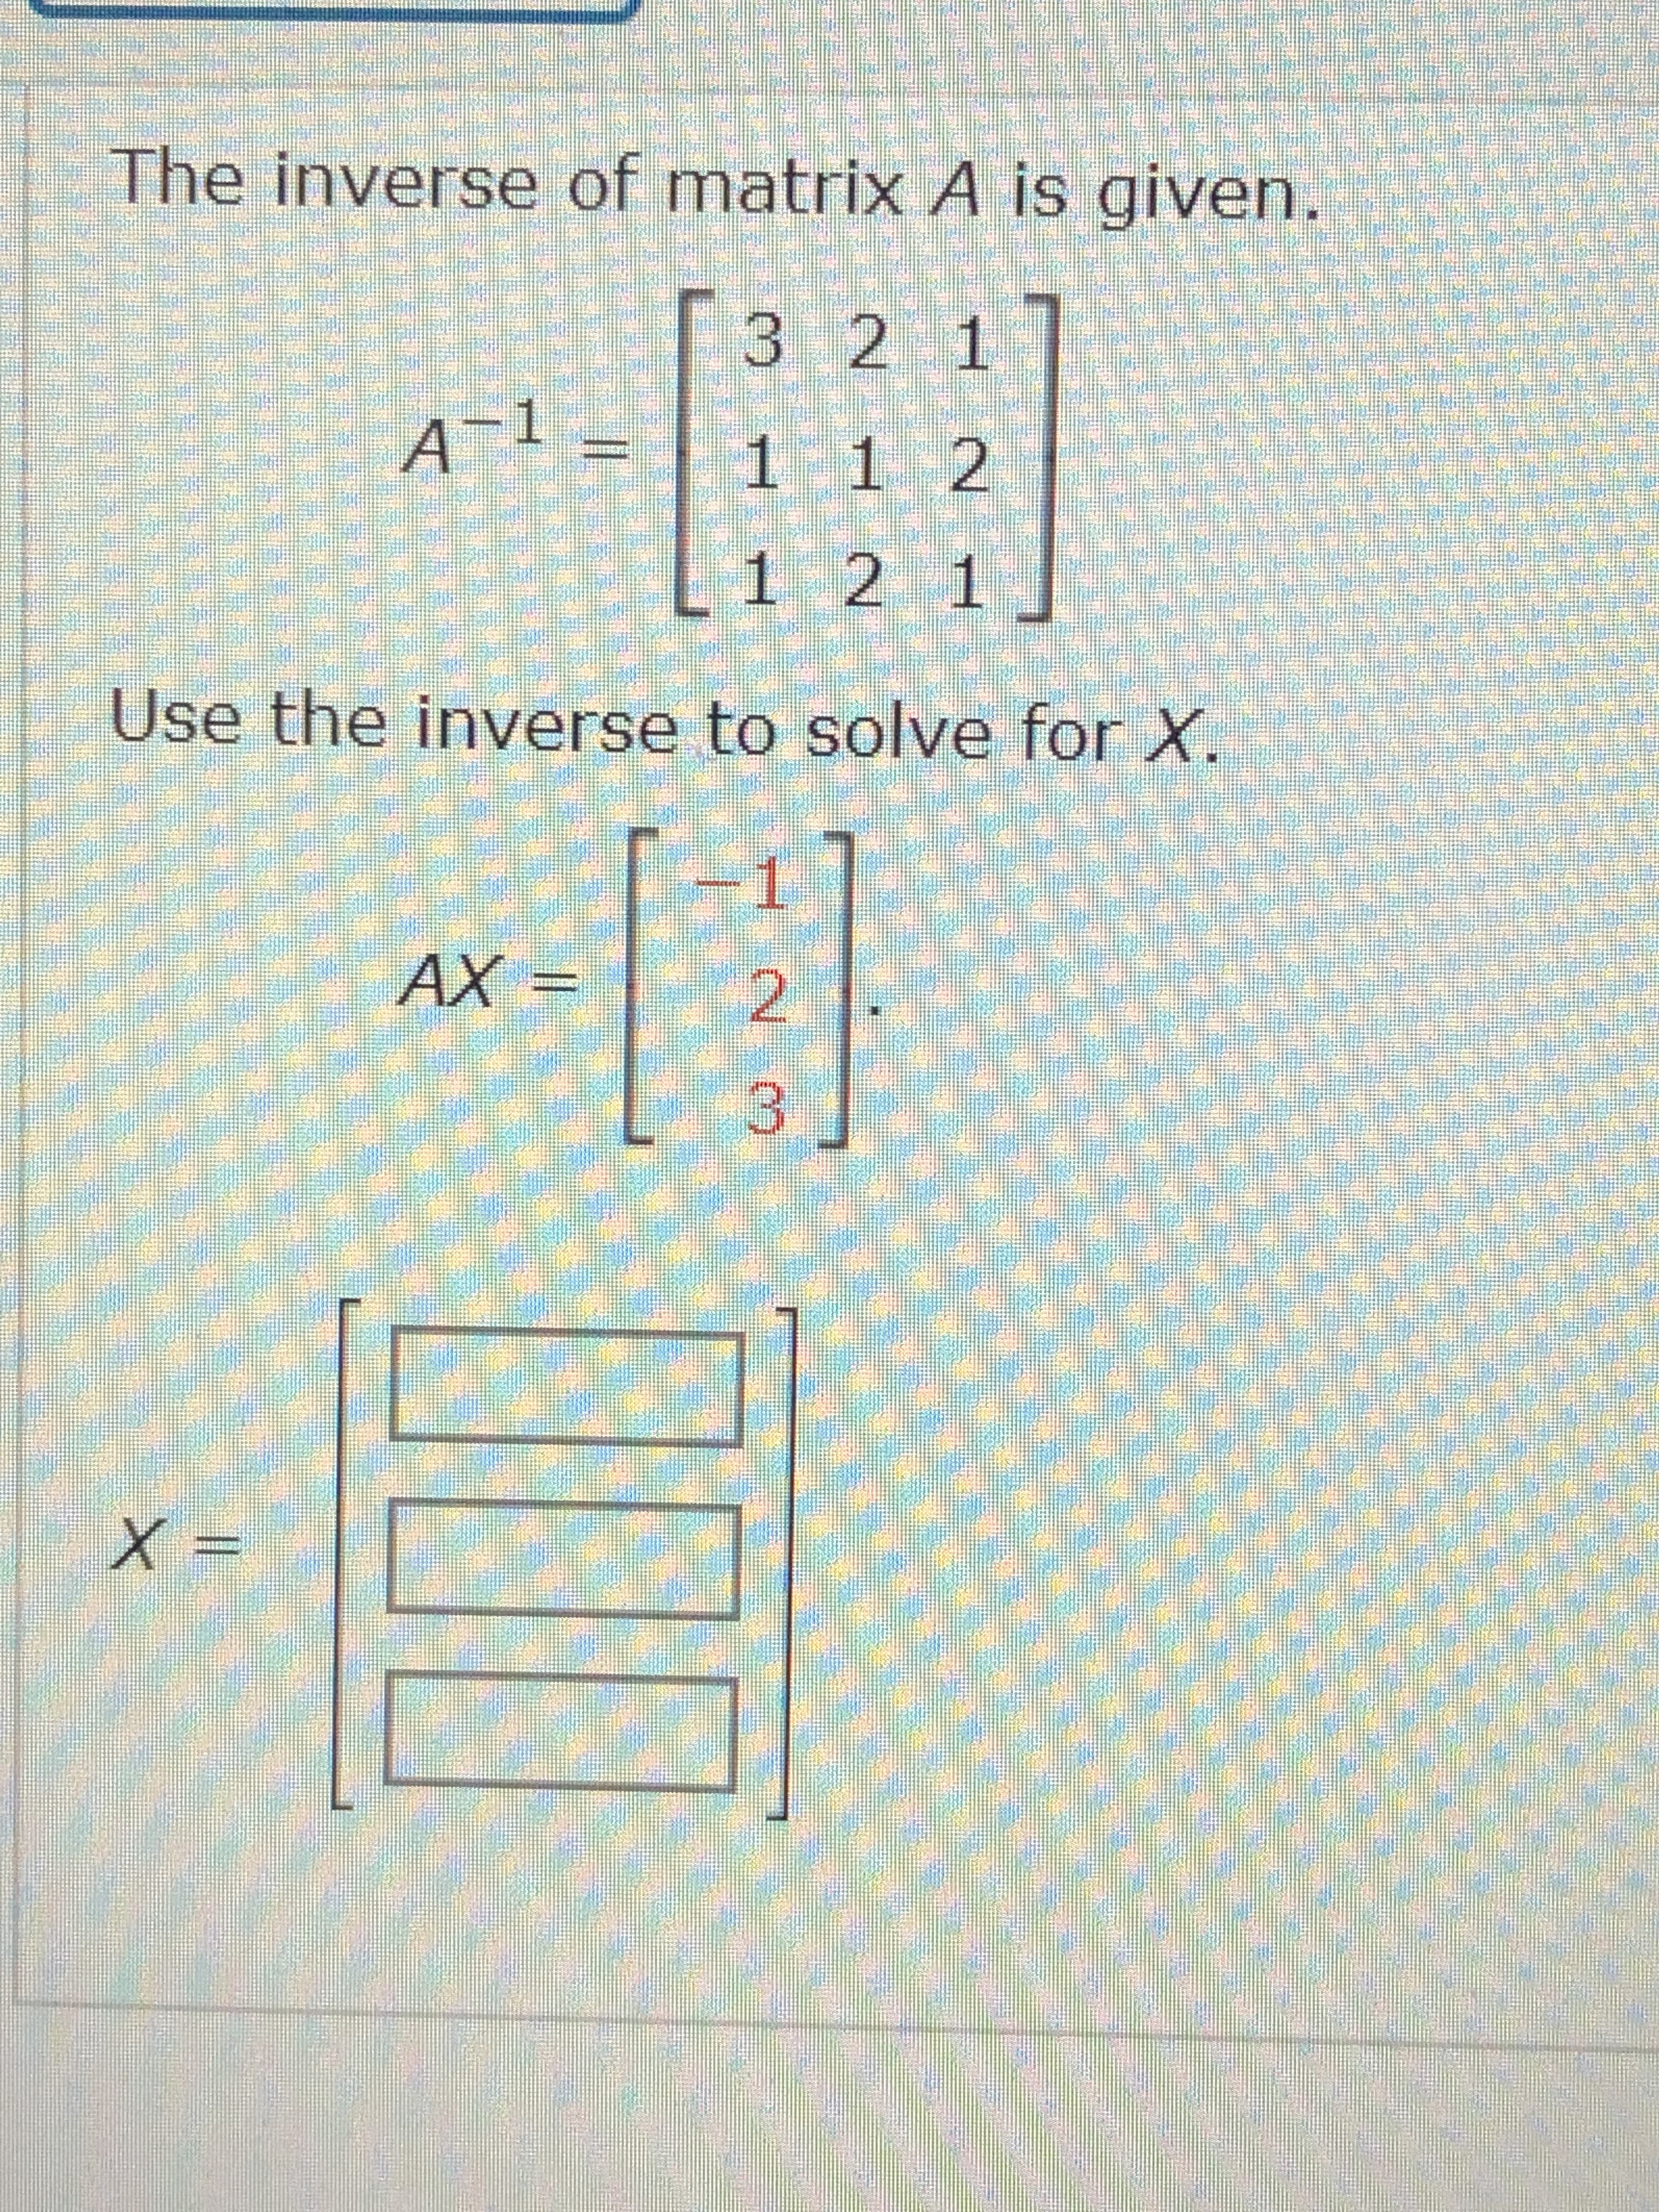 The inverse of matrix A is given.
3 2 1
A¬1 _
1 12
1 2 1
Use the inverse to solve for X.
AX =
2.
X3D
